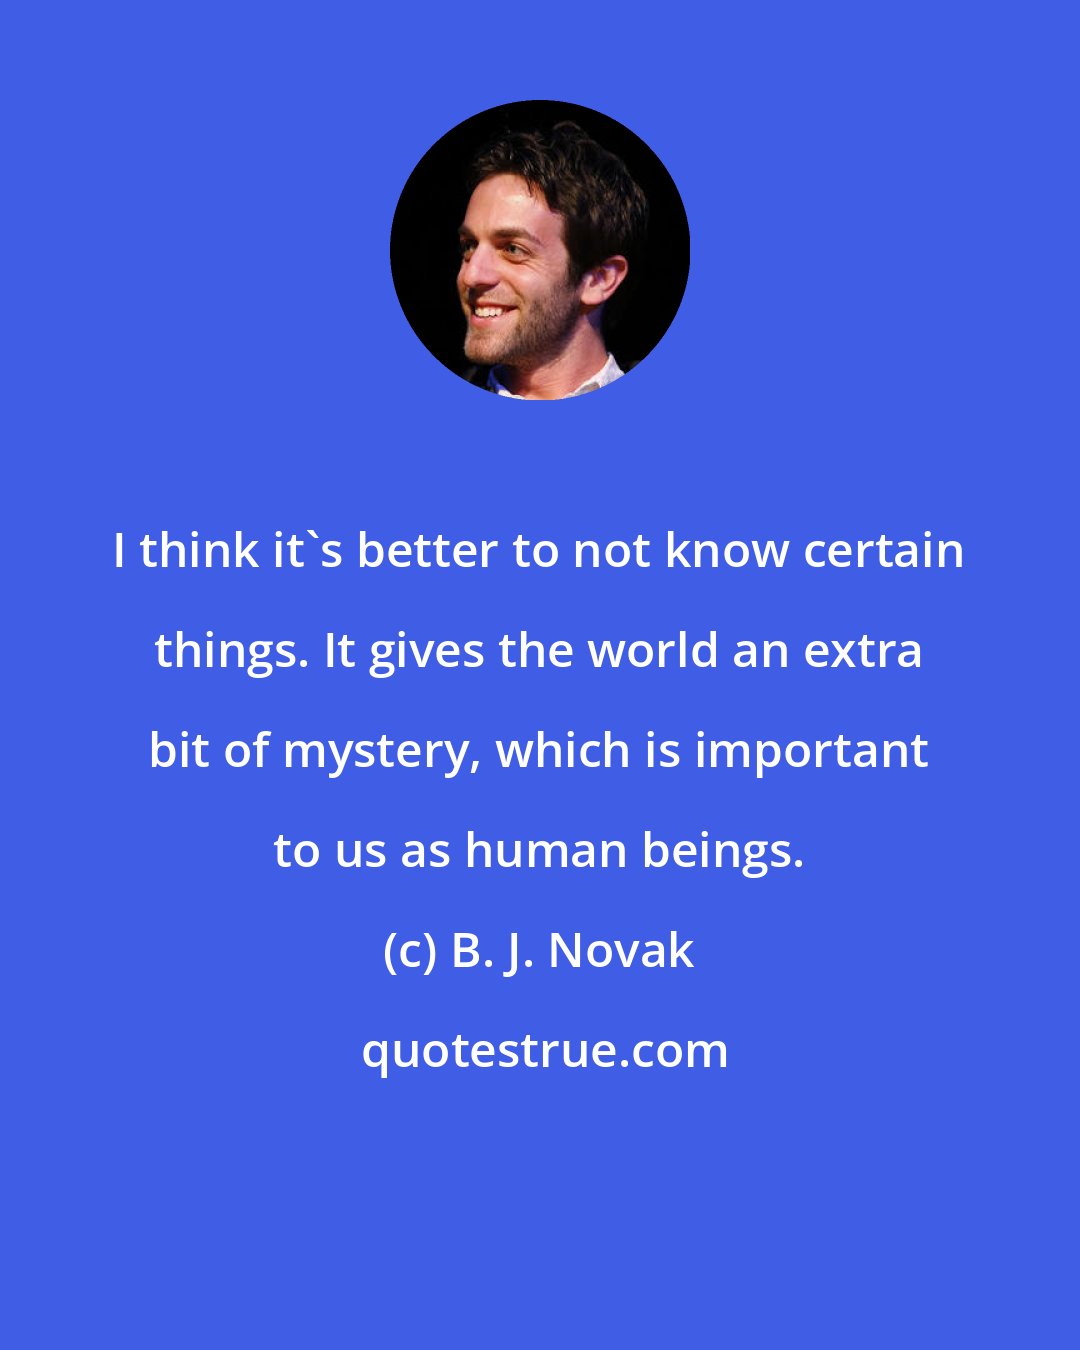 B. J. Novak: I think it's better to not know certain things. It gives the world an extra bit of mystery, which is important to us as human beings.